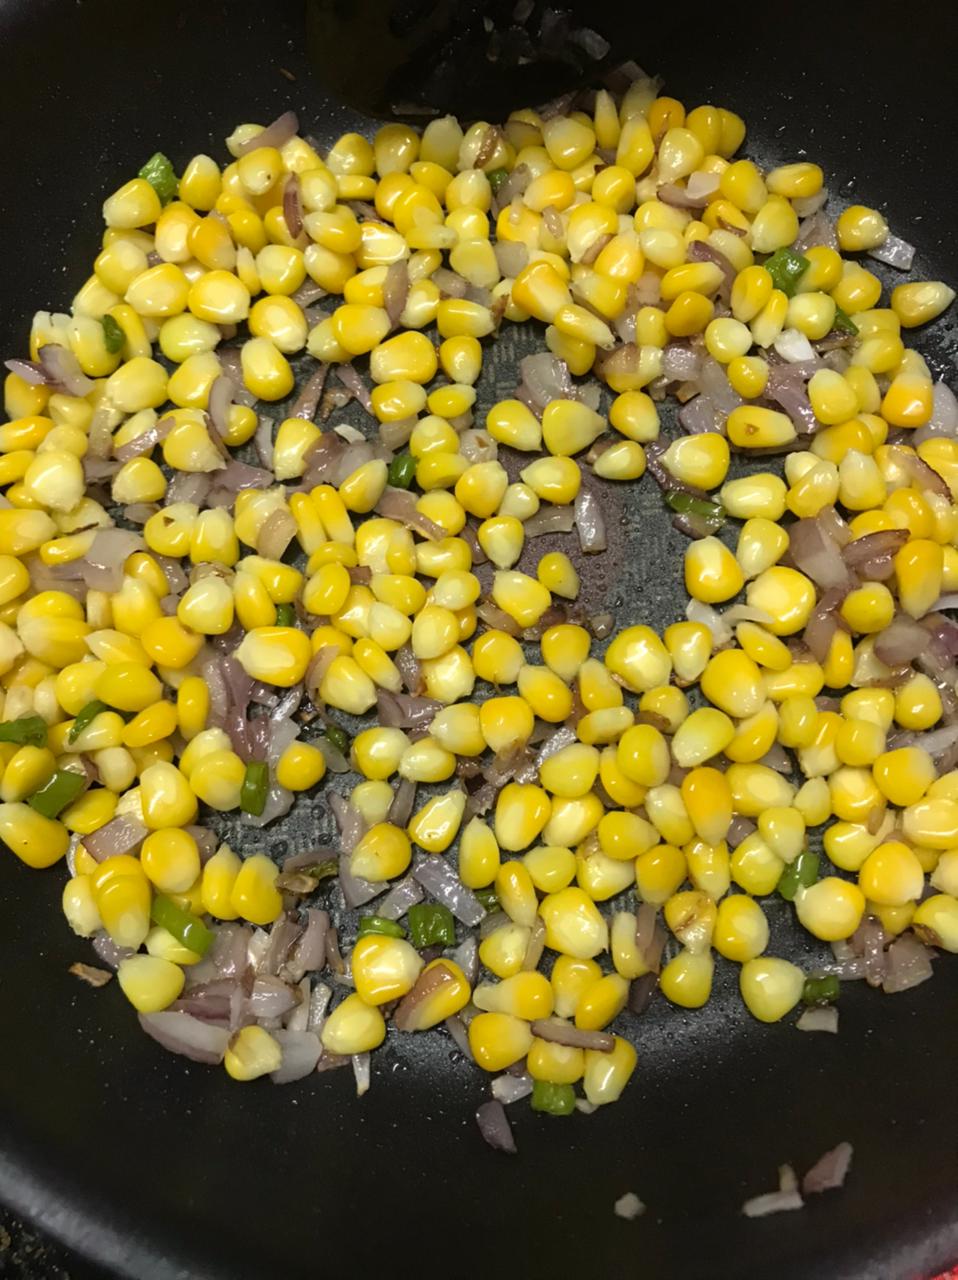 boiled corn added to the onions and green chillies mix in the pan